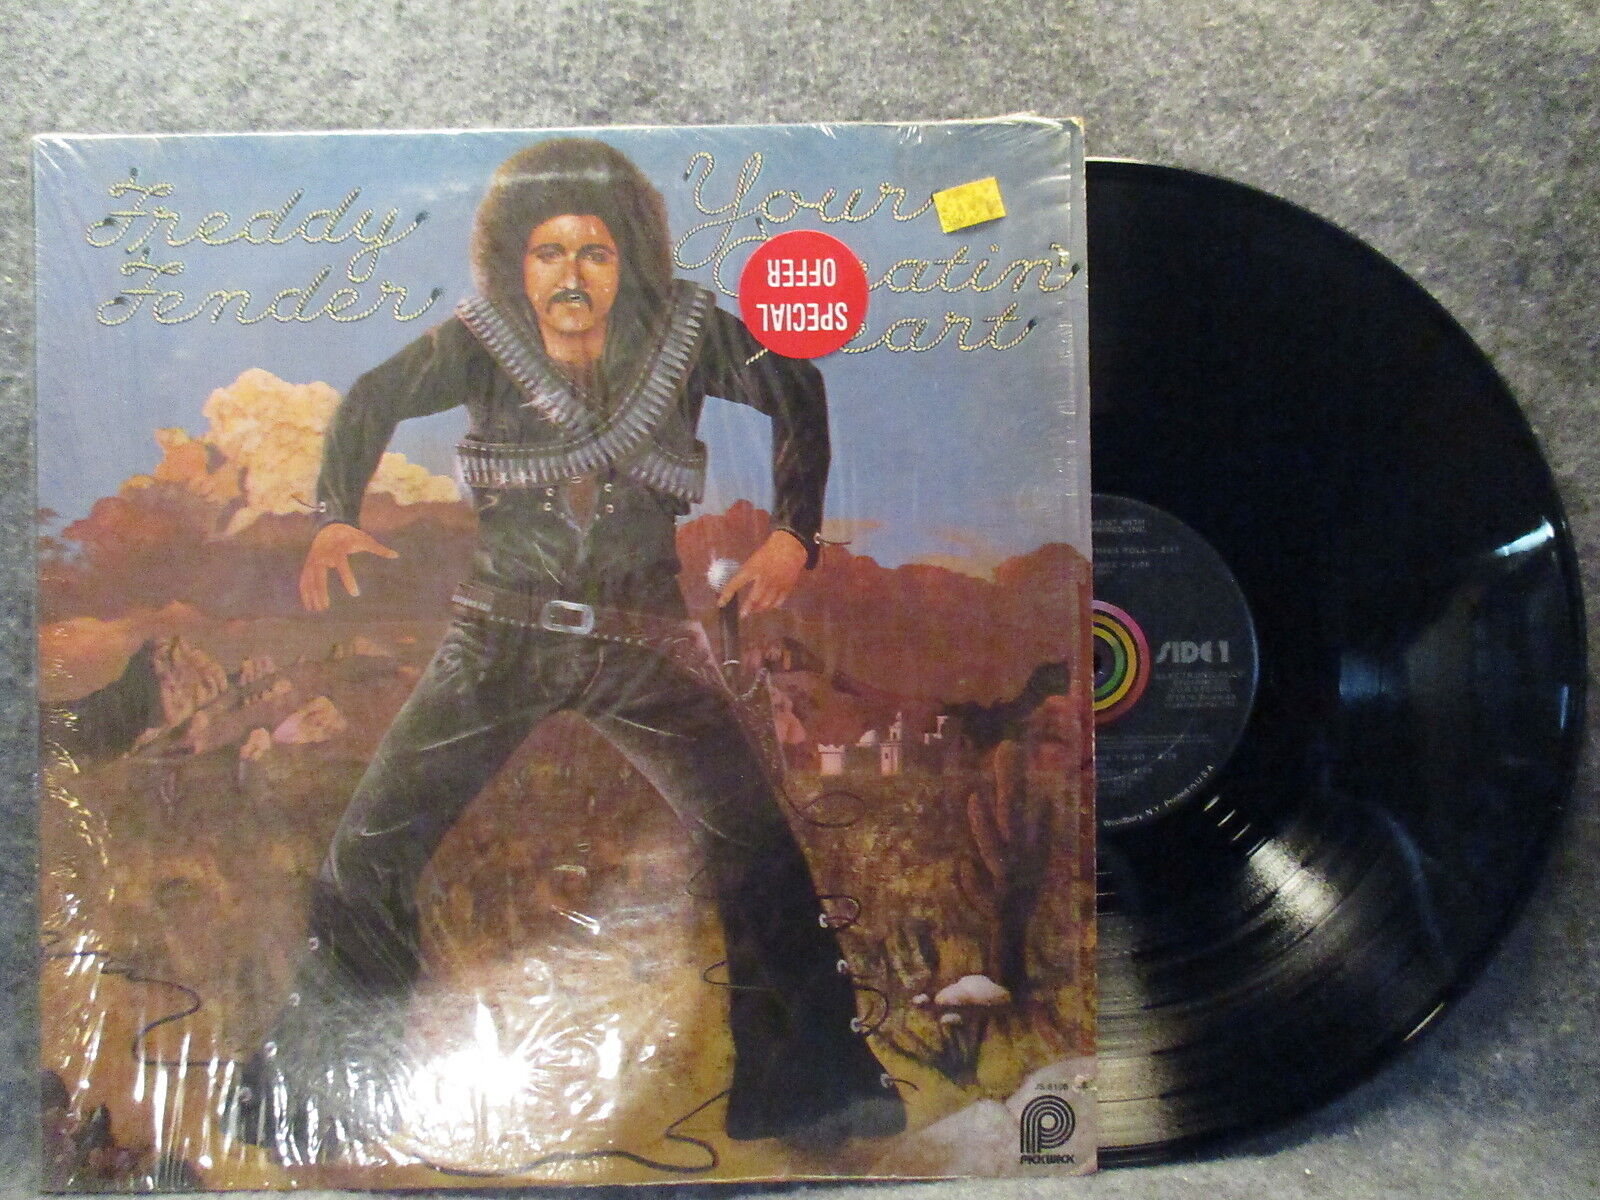 33 RPM LP Record Freddy Fender Your Cheatin' Heart 1976 Pickwick Records JS-6195